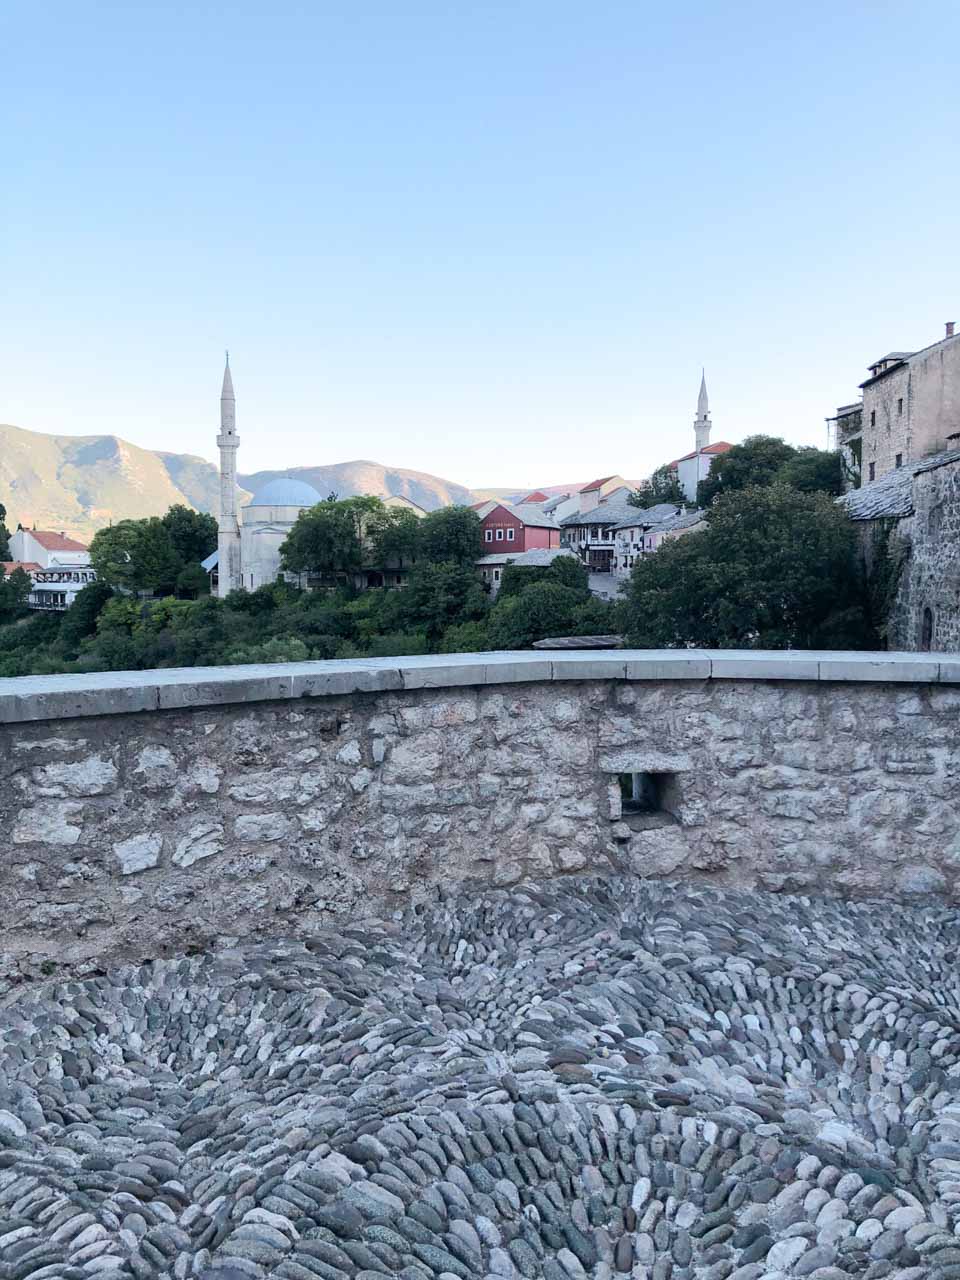 View of Mostar from the Old Bridge